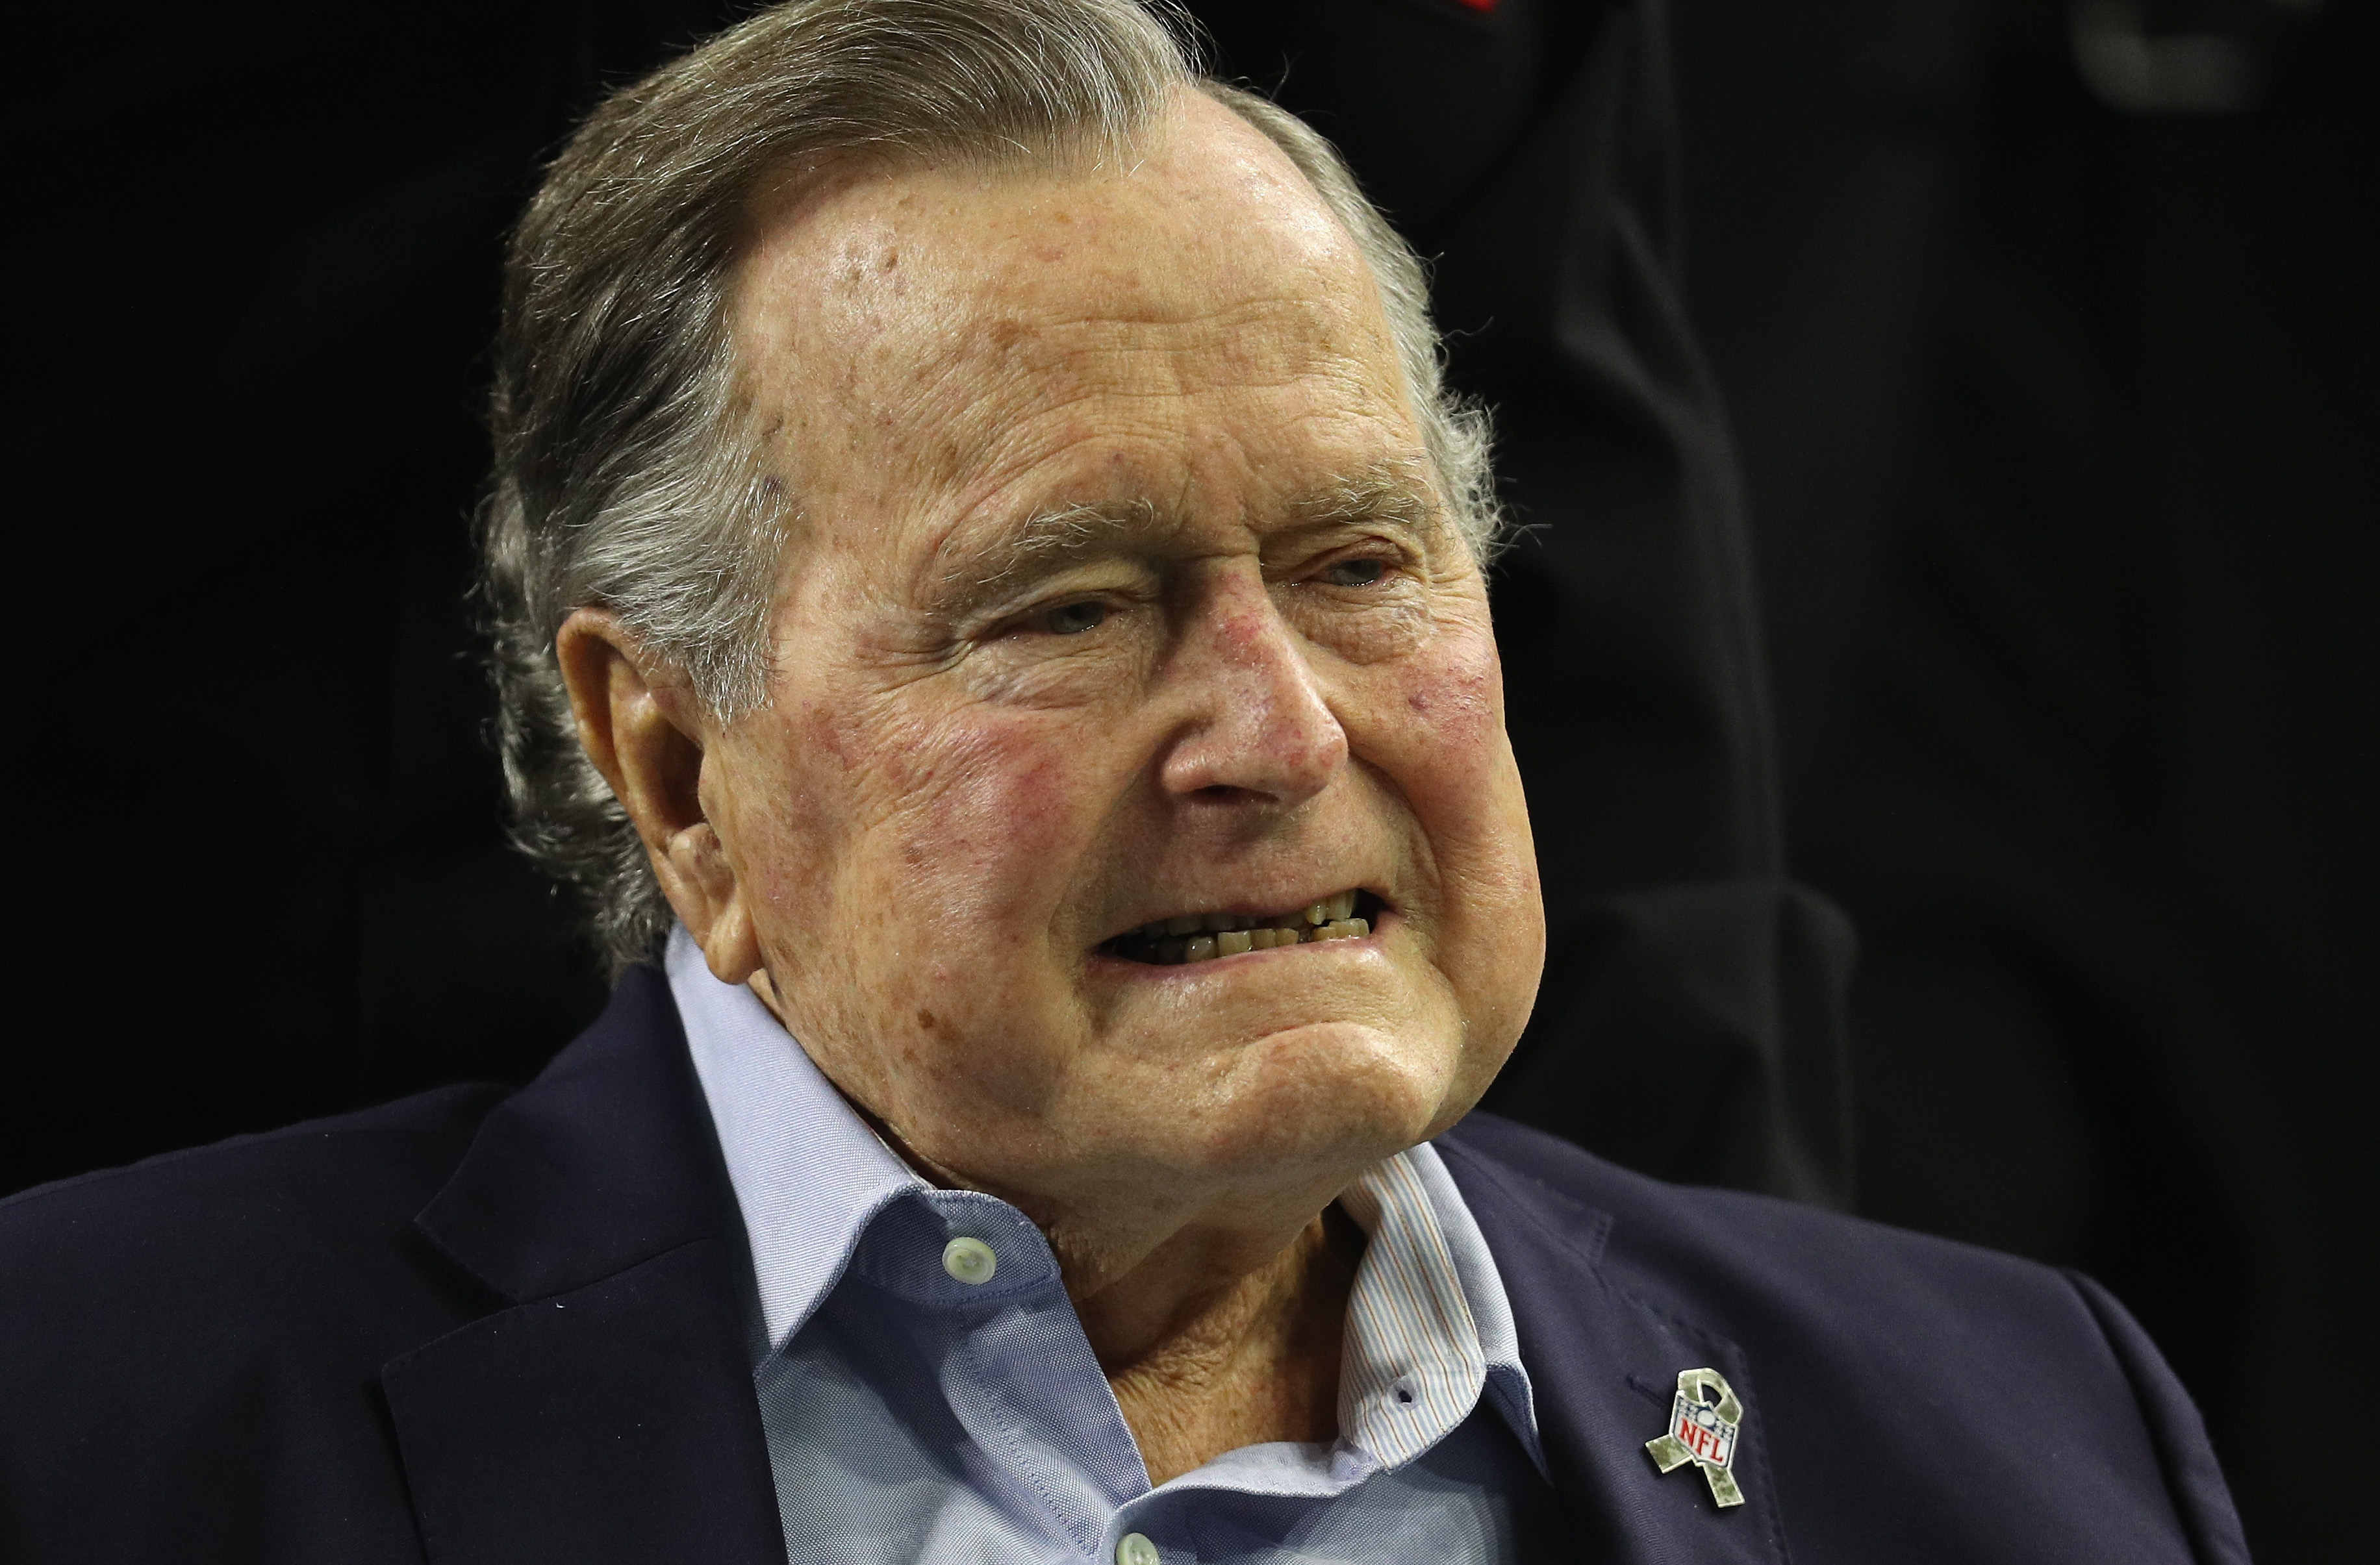 HOUSTON, TX - FEBRUARY 05: President George H.W. Bush arrives for the coin toss prior to Super Bowl 51 between the Atlanta Falcons and the New England Patriots at NRG Stadium on February 5, 2017 in Houston, Texas.  (Photo by Patrick Smith/Getty Images)